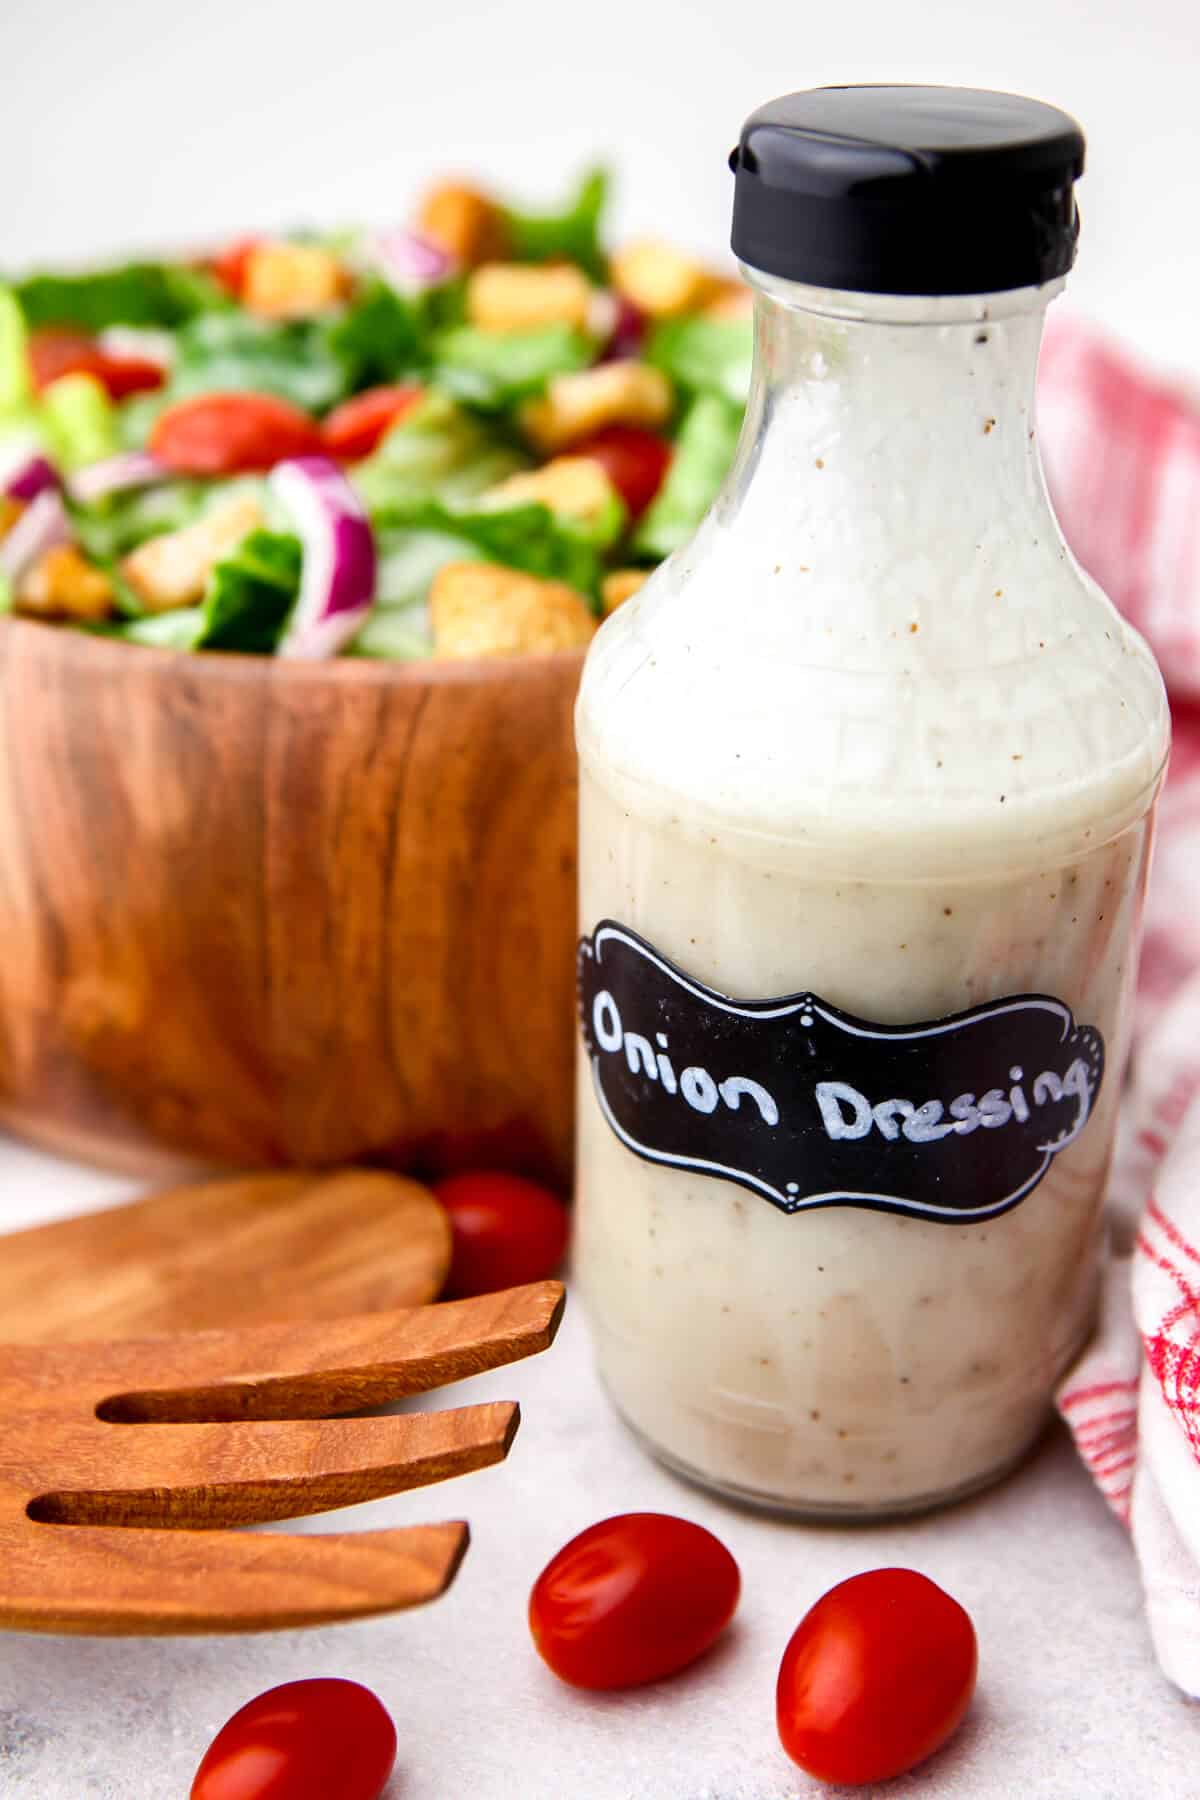 A bottle of Vidalia onion dressing in front of a green salad.